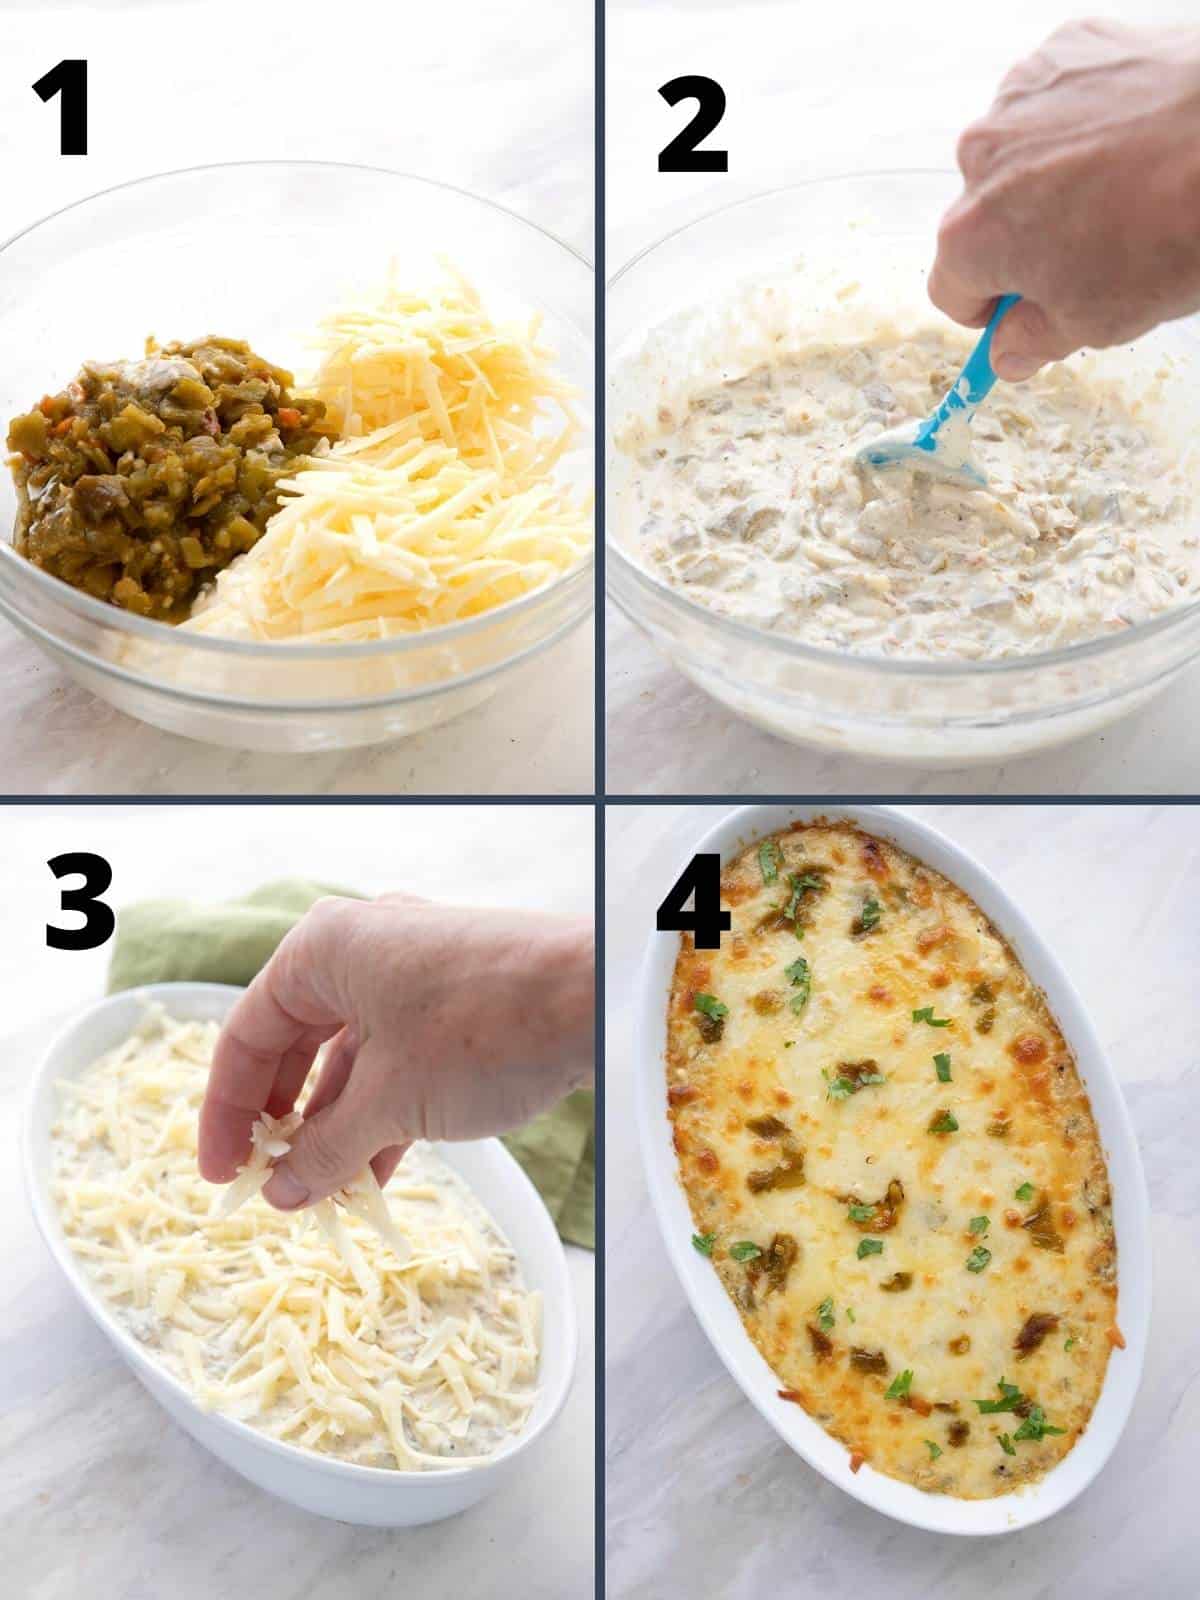 A collage of four images showing how to make Green Chili Dip.